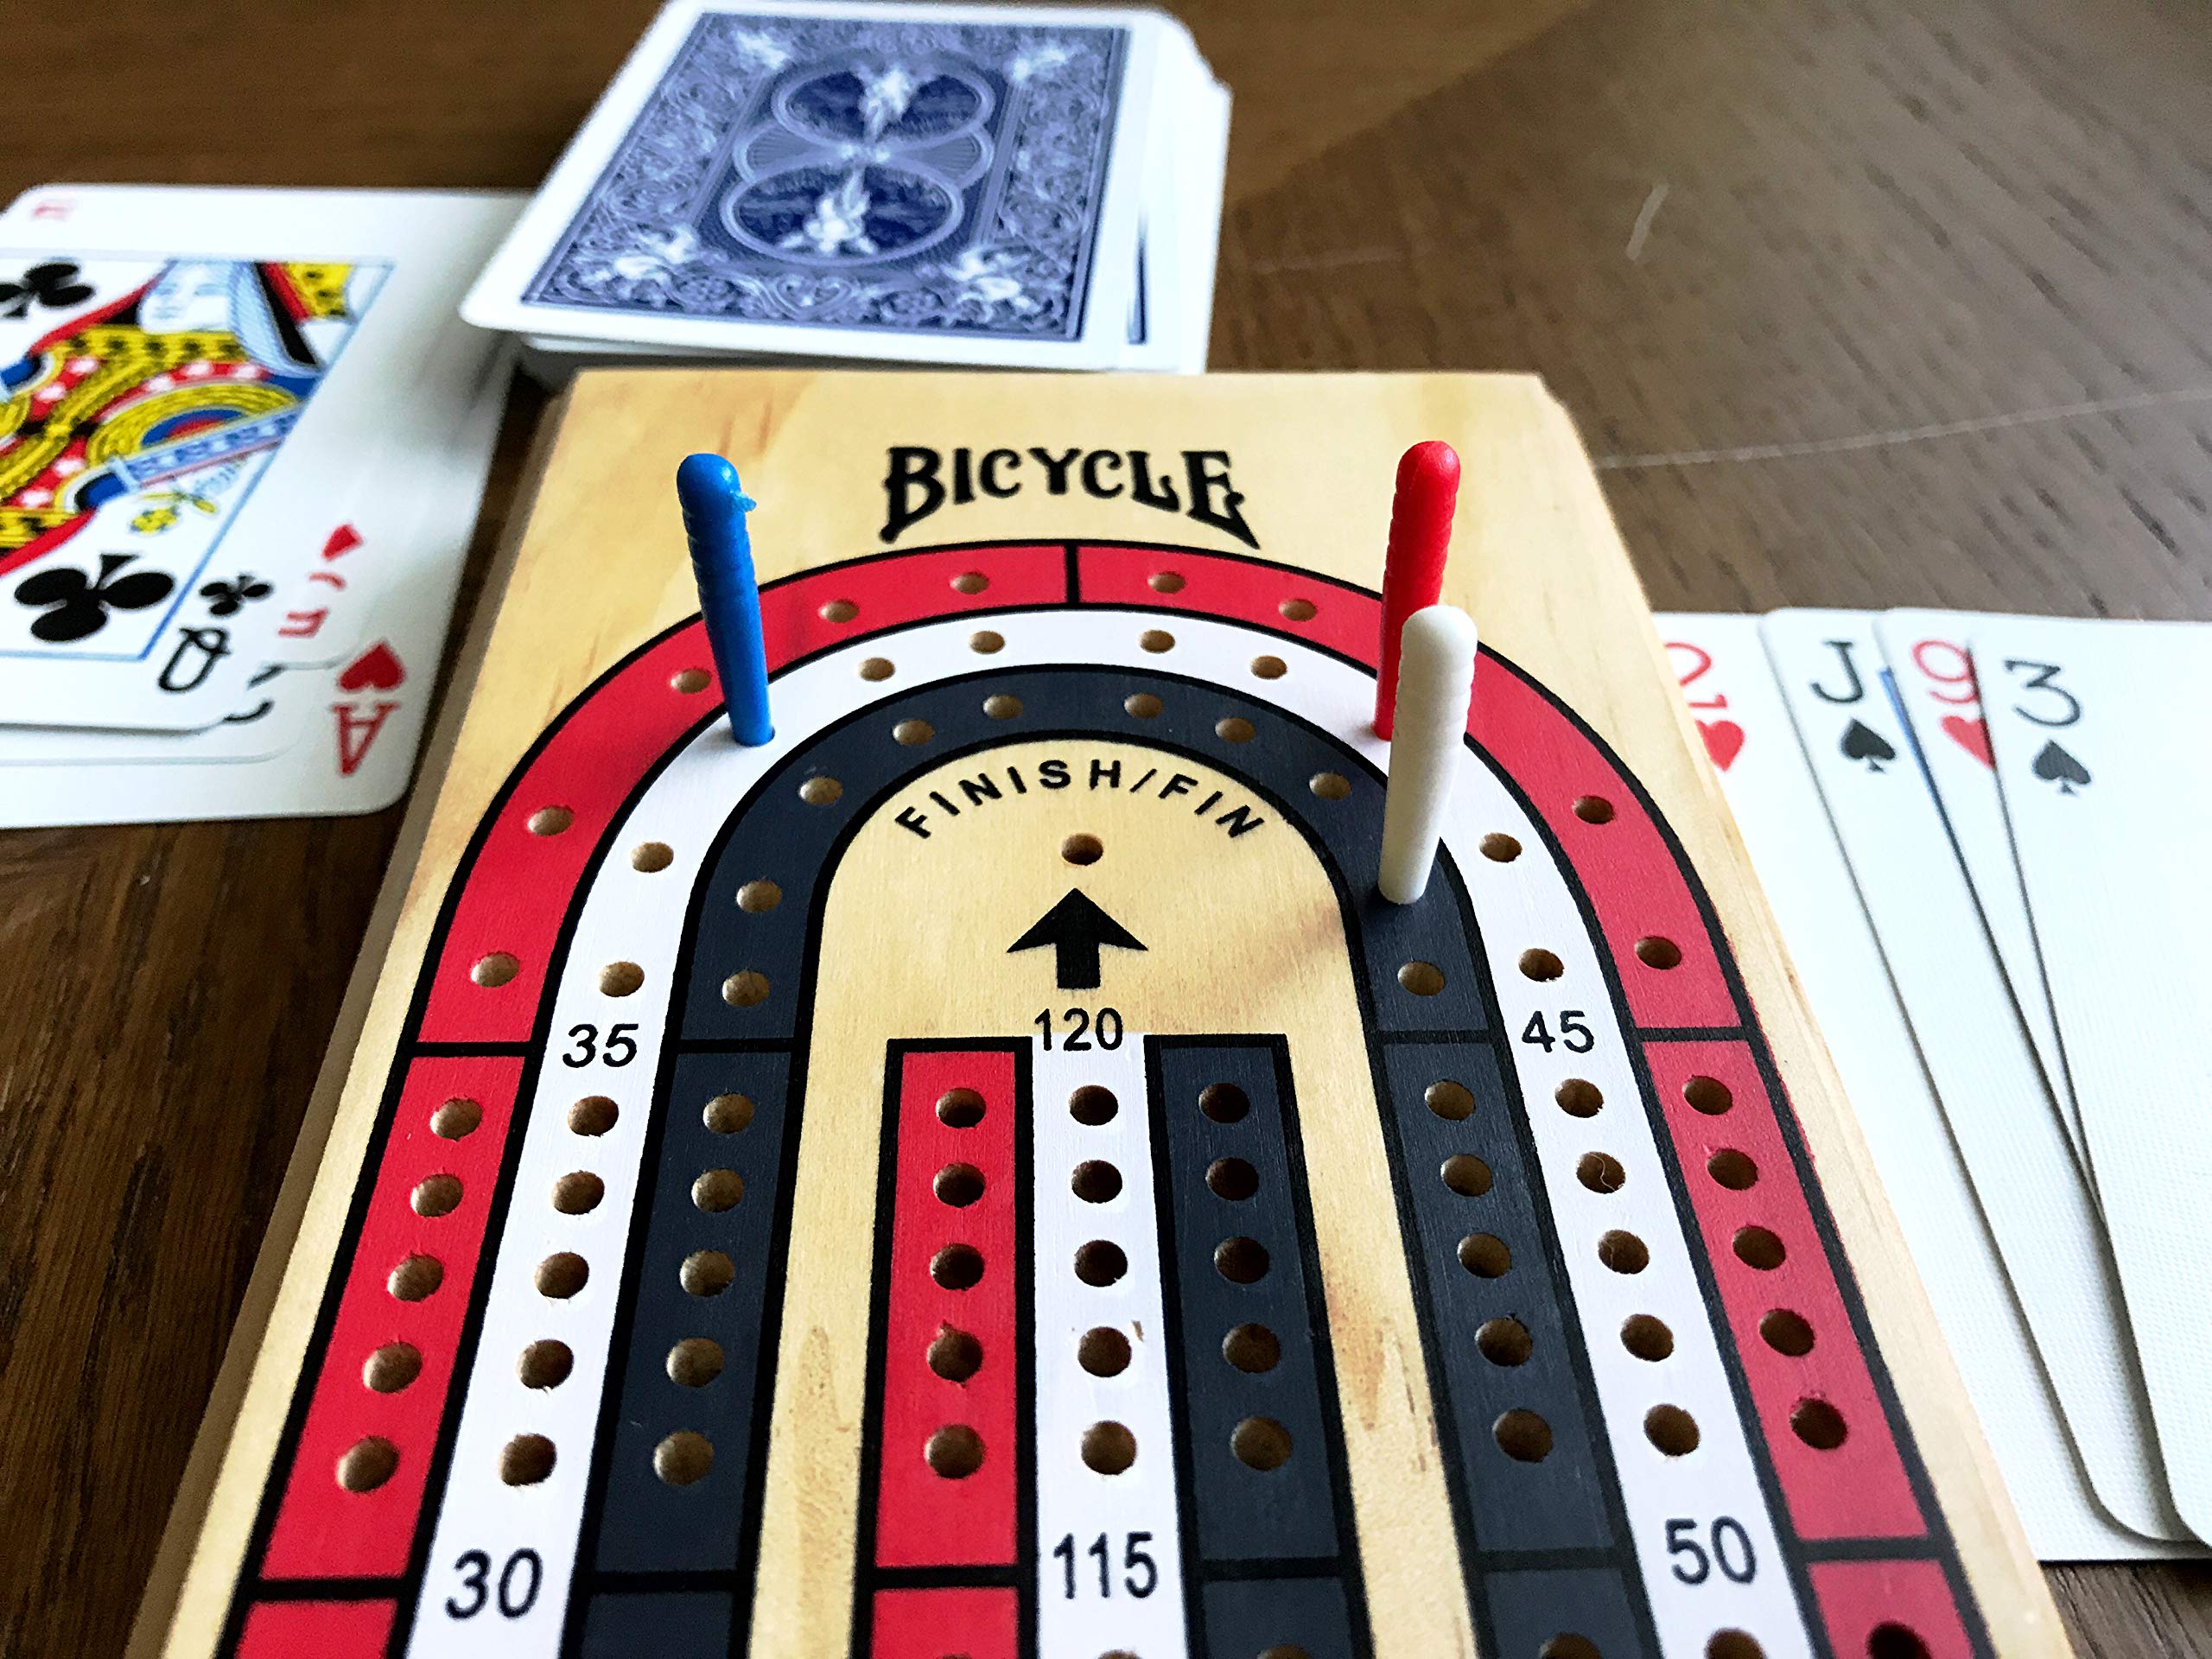 Bicycle 3-Track Color Coded Wooden Cribbage Board Games